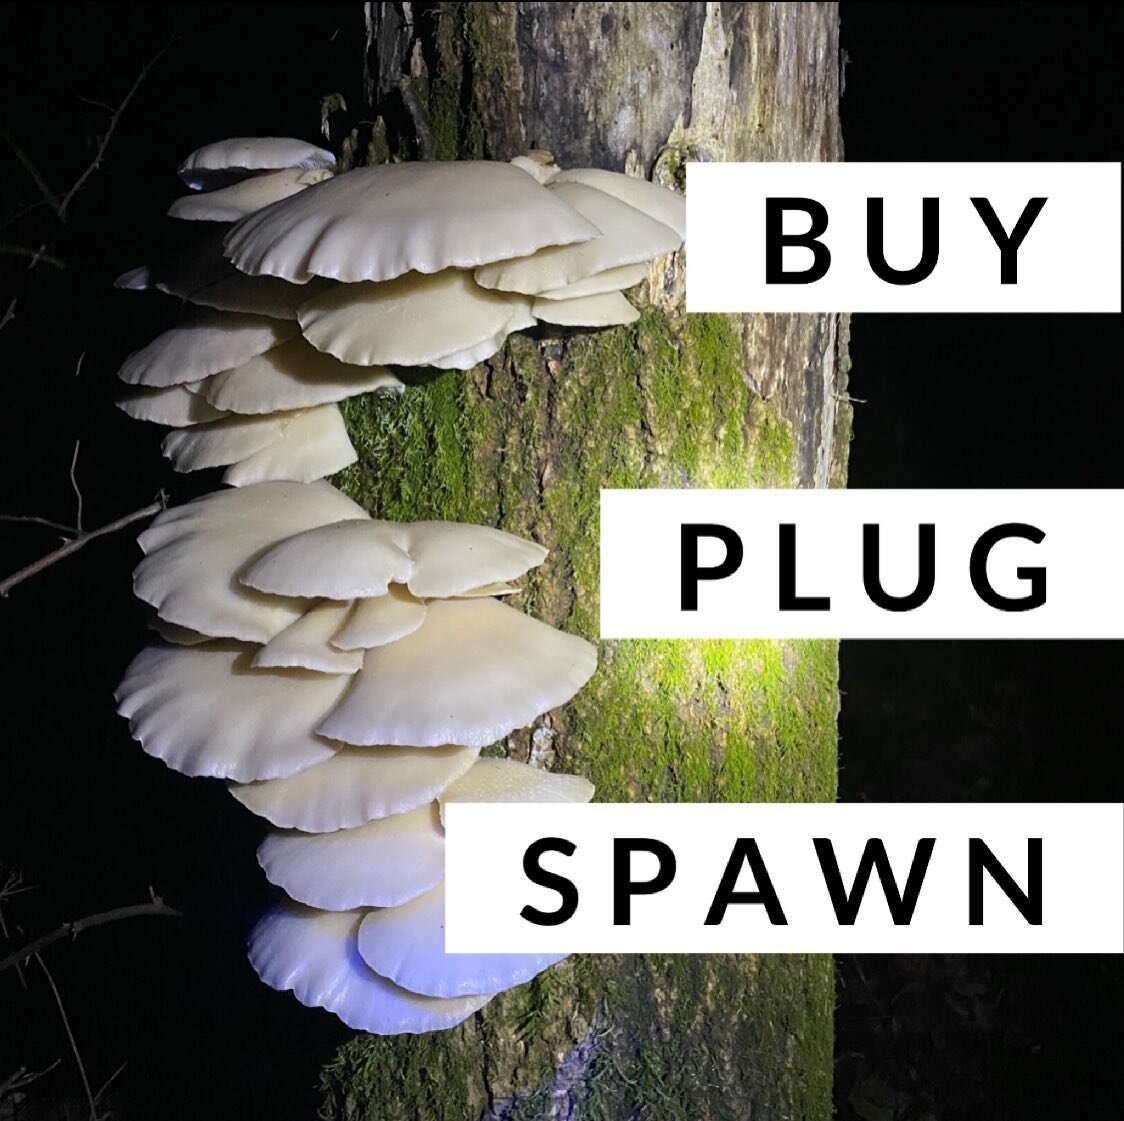 Check out the plug spawn page on our website! We've updated all our shipping pricing and are working on bringing better pricing to the mushroom people! Unfortunately our web host doesn't have integrations with the shipping providers so our discounts 